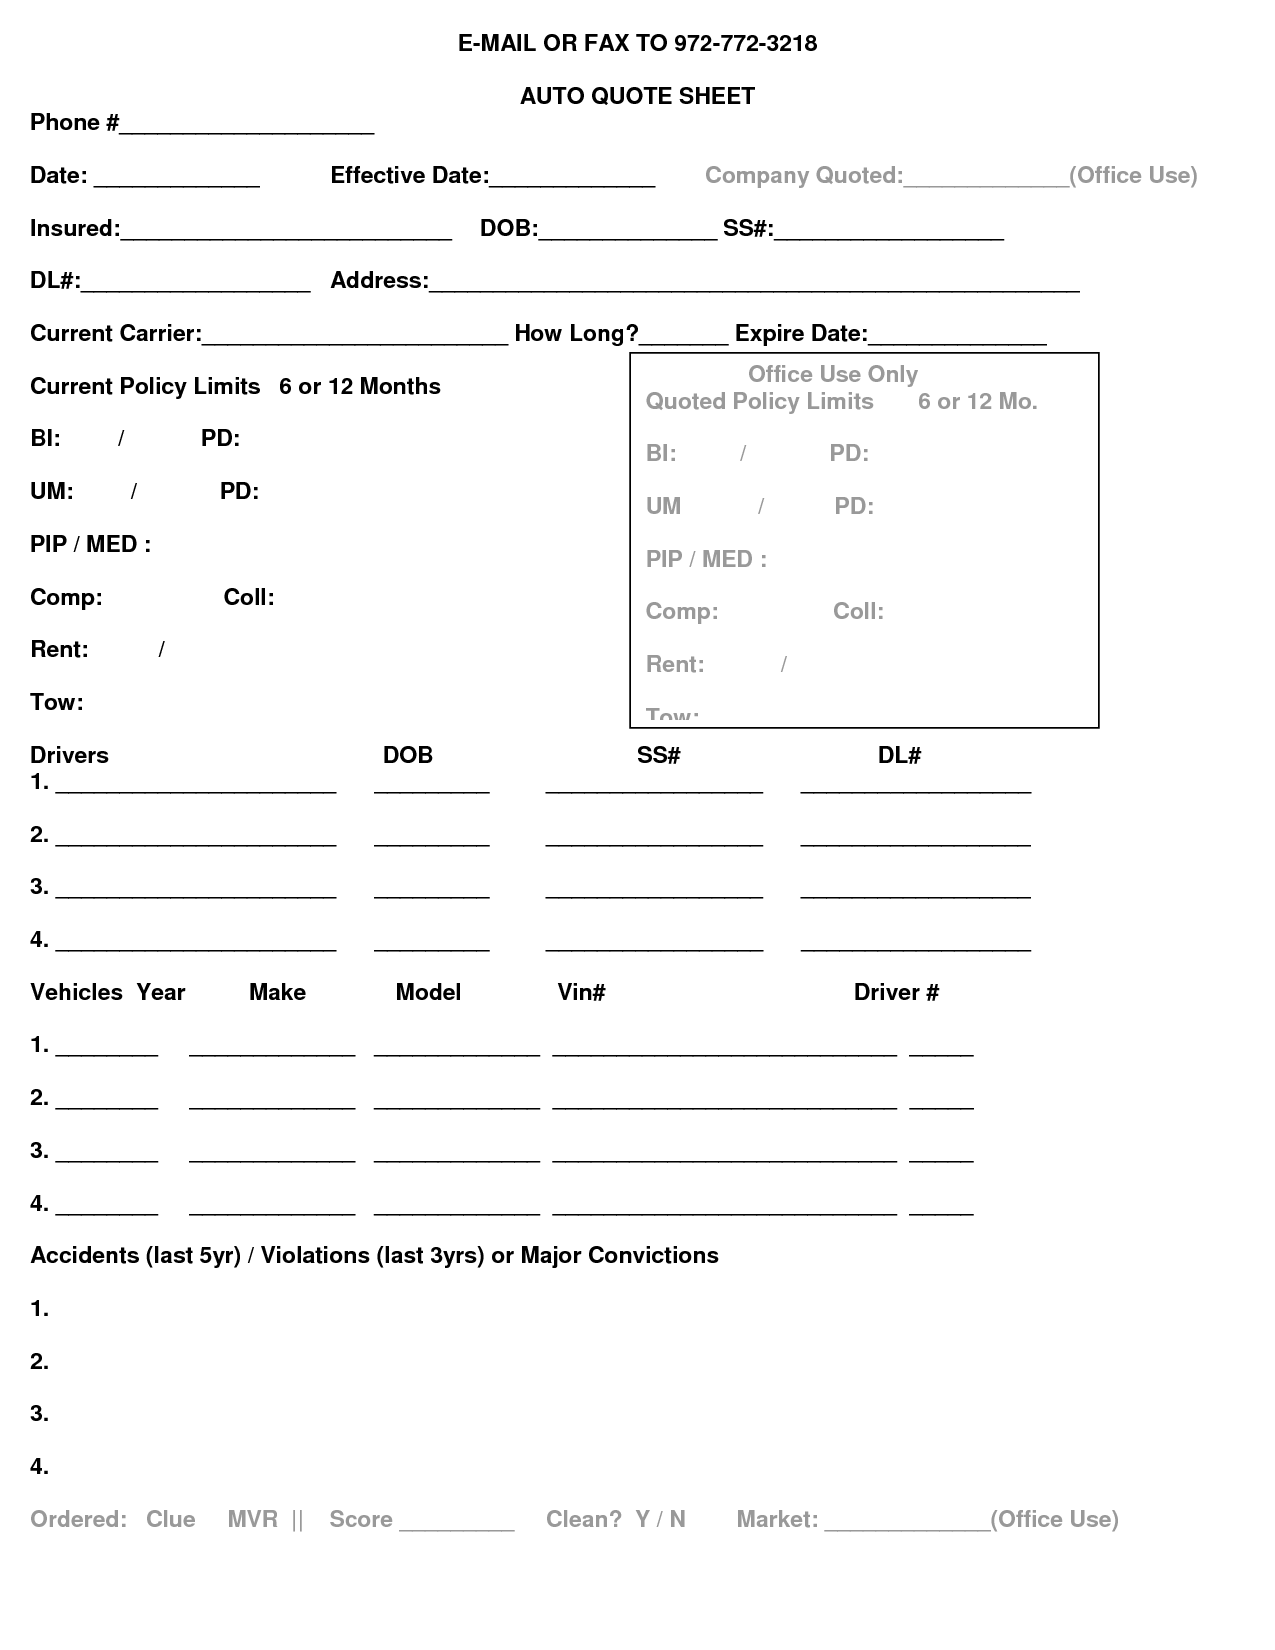 Life Insurance Quote Form 09